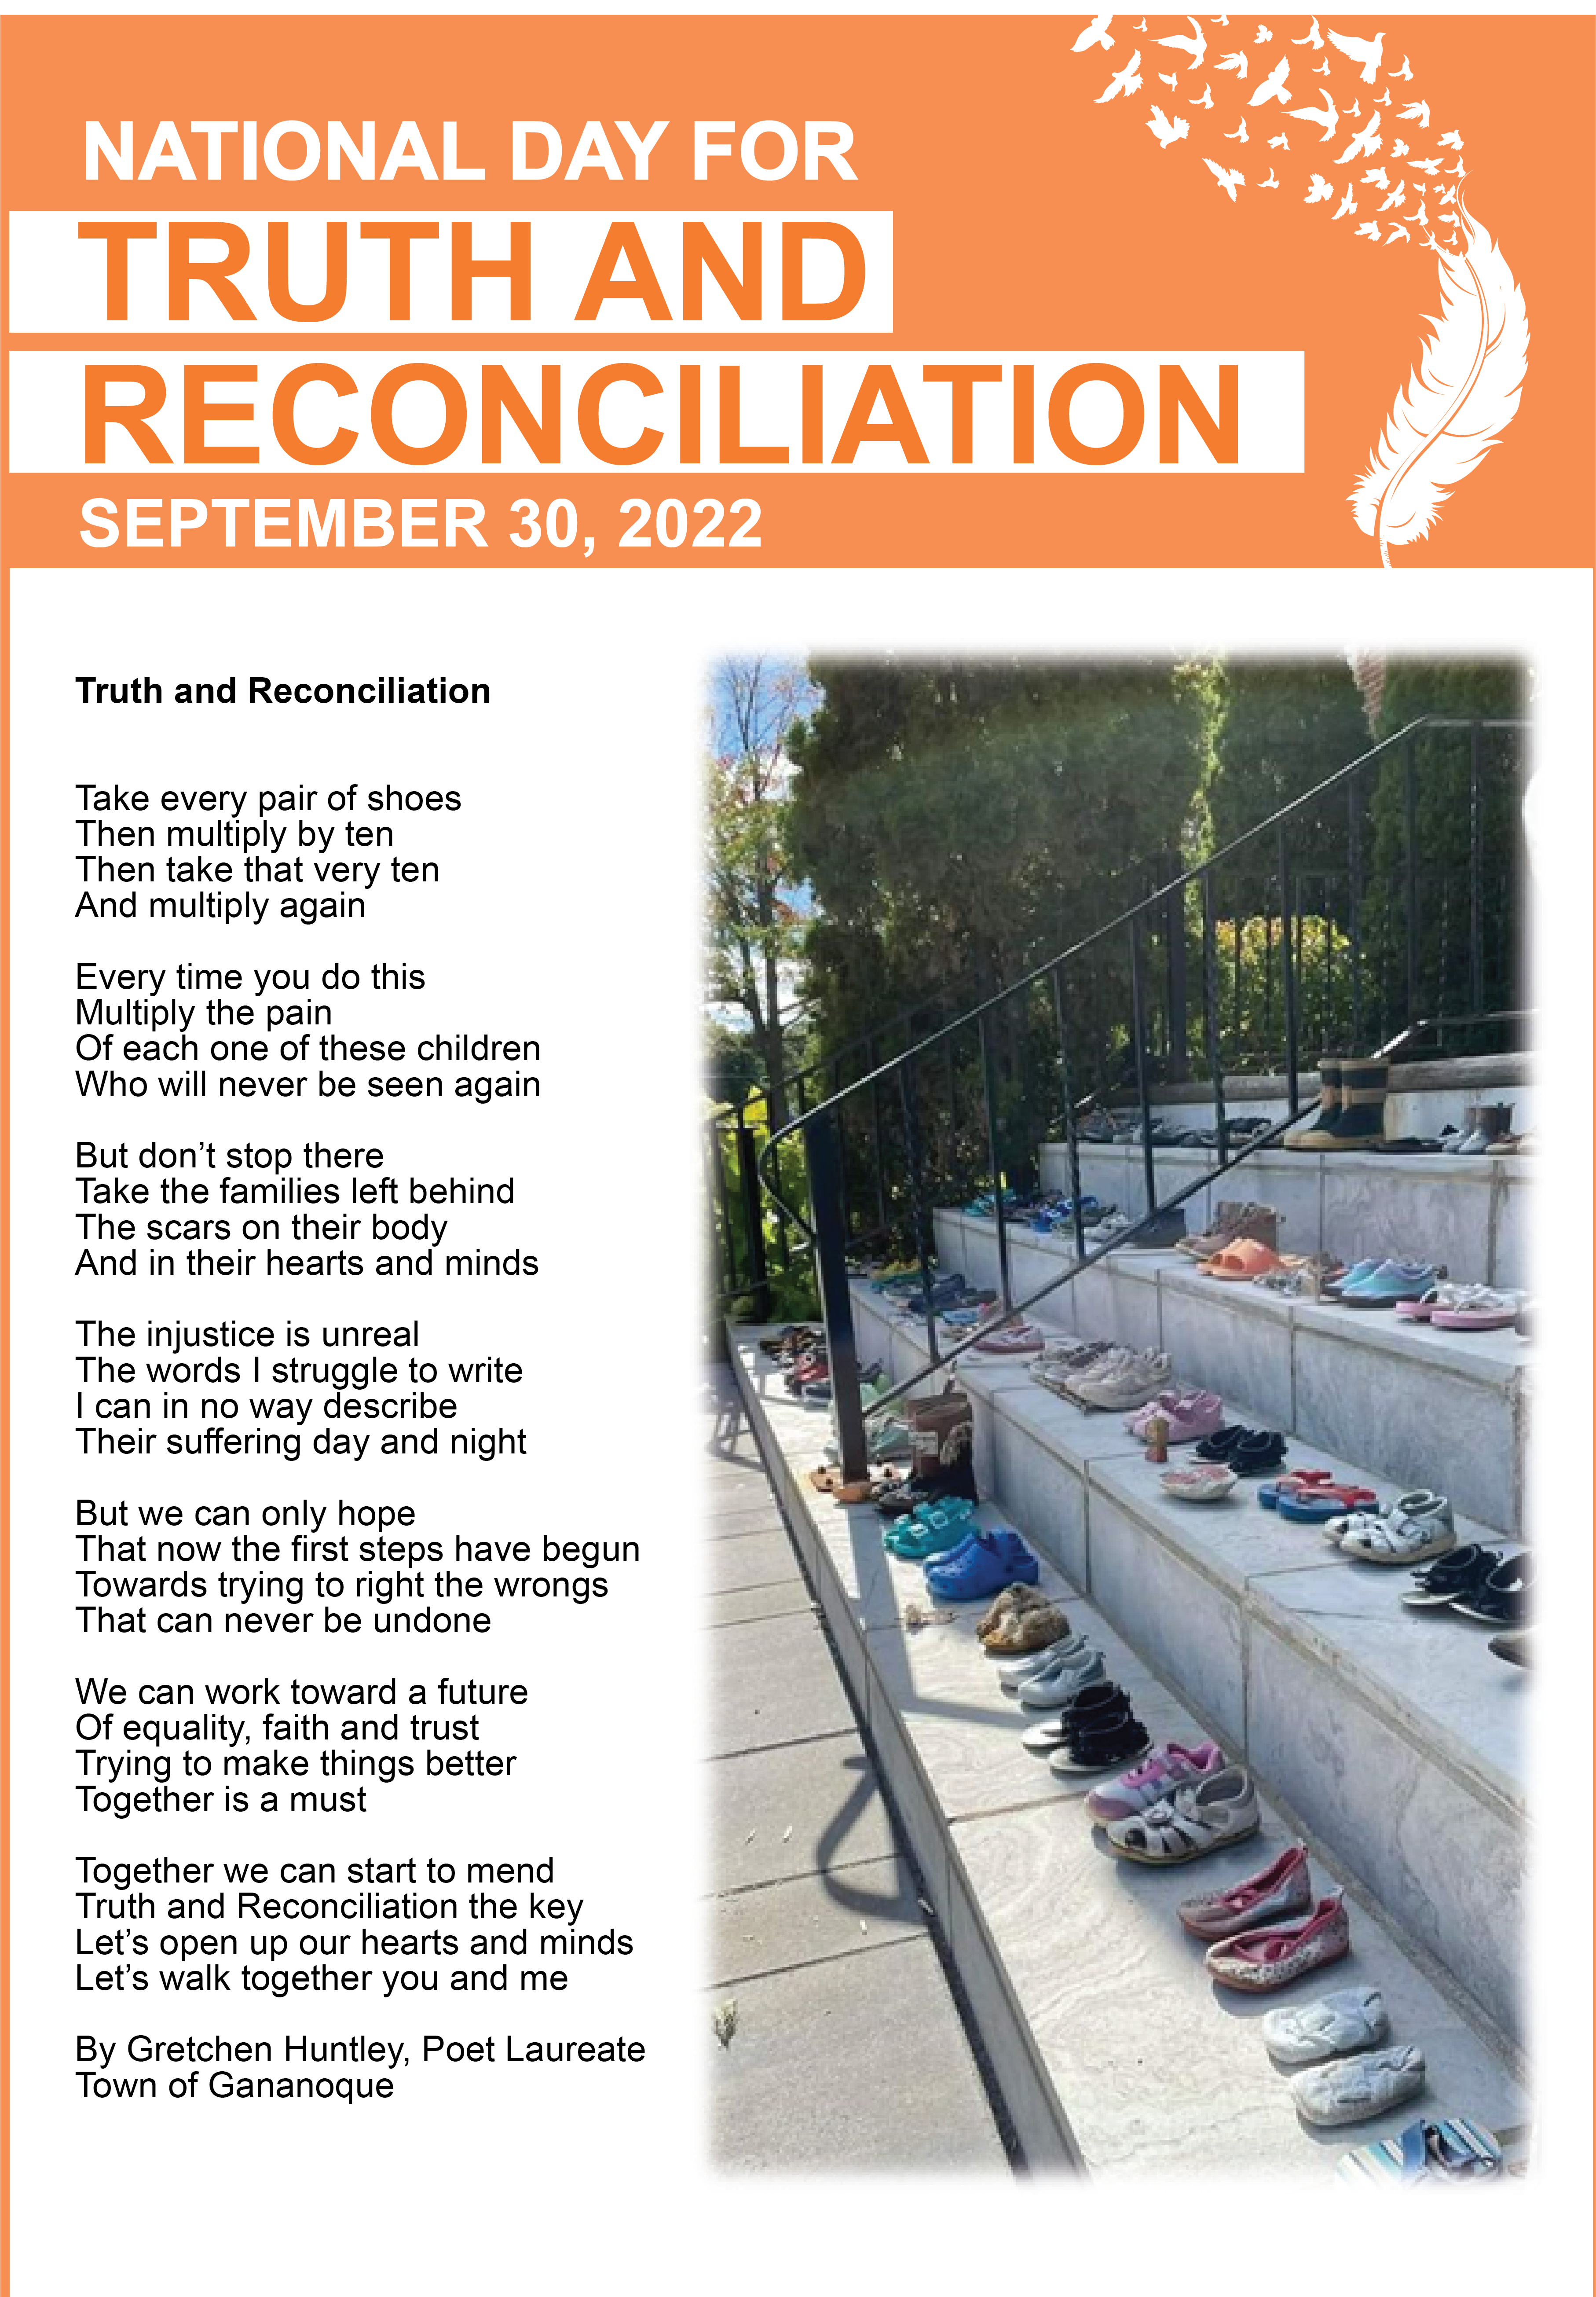 This National Day for Truth and Reconciliation